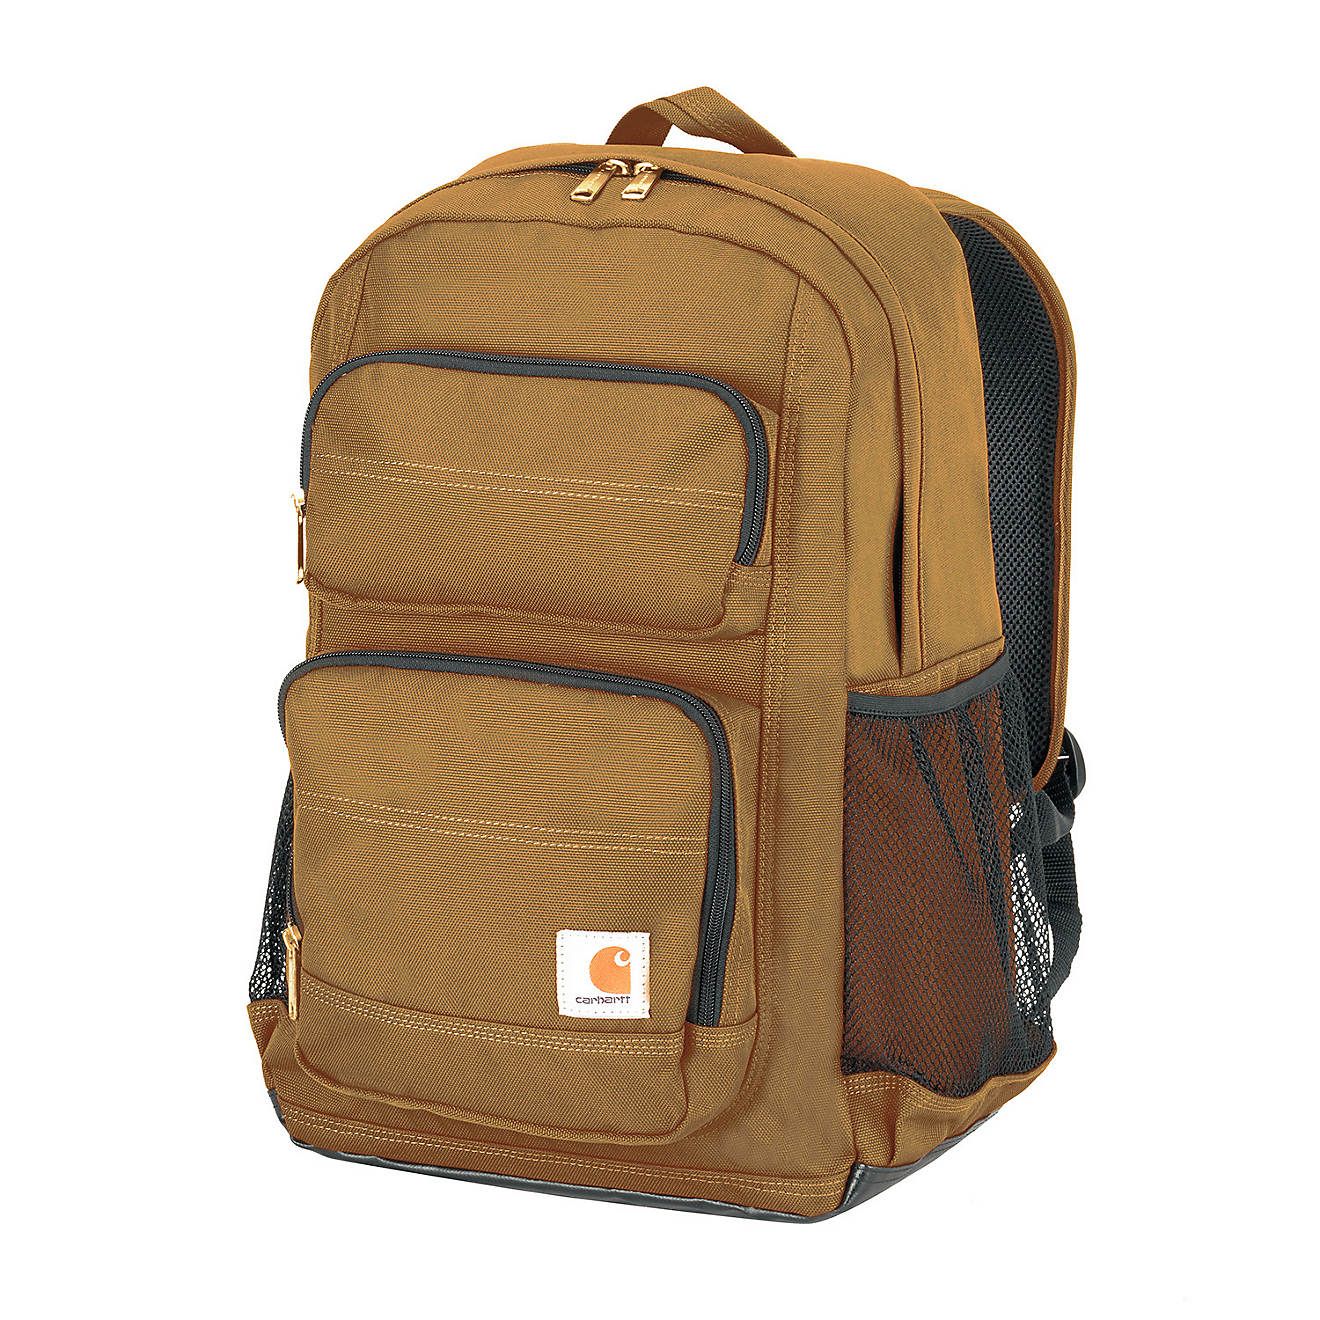 Carhartt Legacy Collection Standard Work Pack | Academy Sports + Outdoor Affiliate